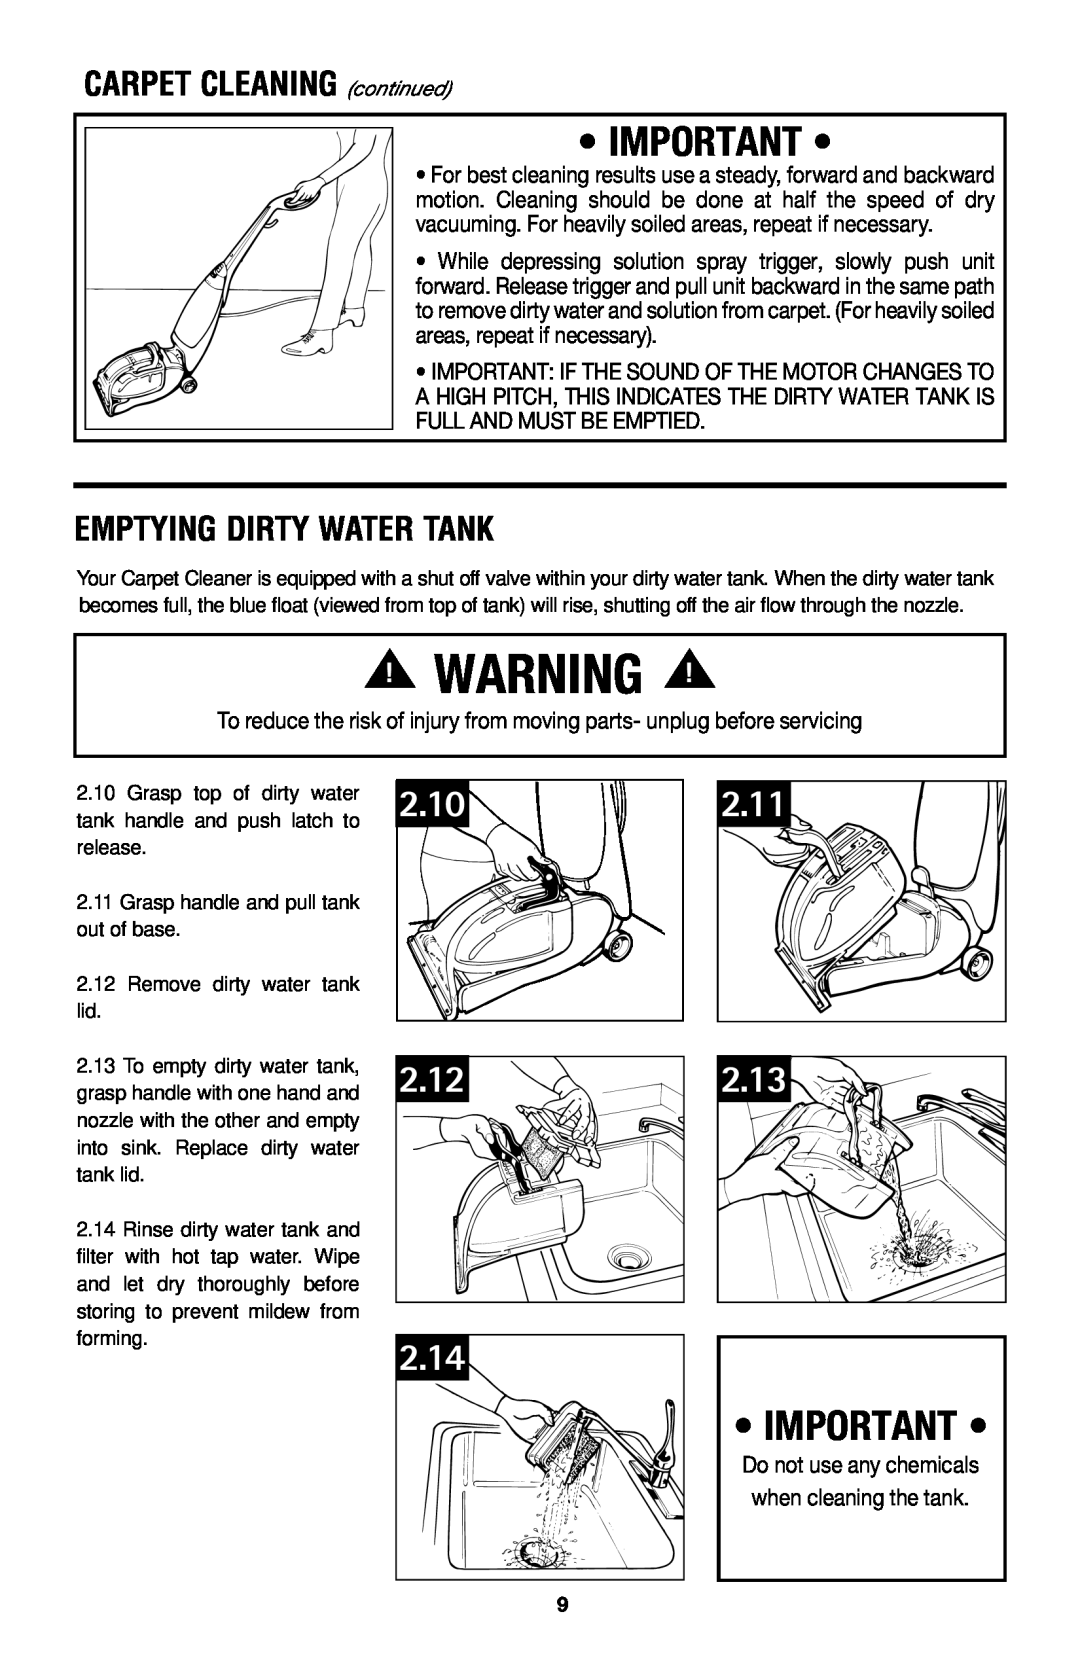 Hoover E1 owner manual 2.10 2.12, 2.14, 2.11, 2.13, CARPET CLEANING continued, Emptying Dirty Water Tank 